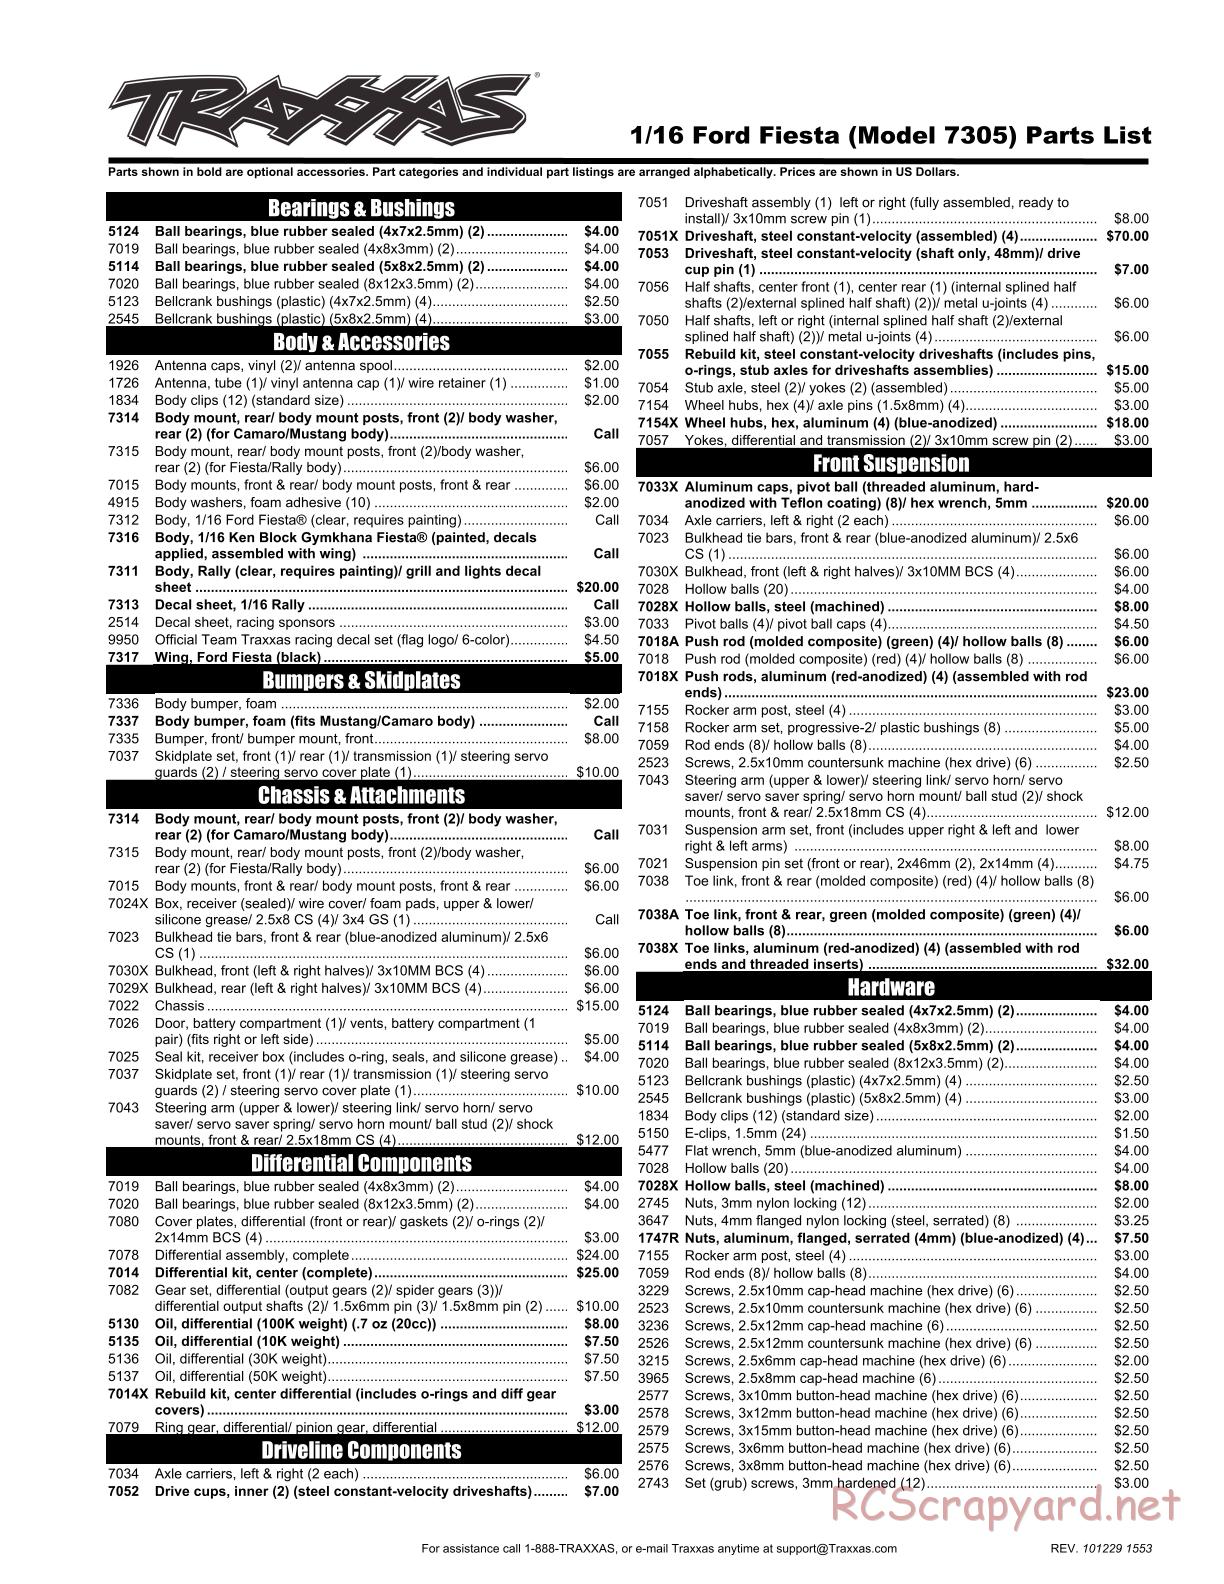 Traxxas - 1/16 Ford Fiesta (2011) - Parts List - Page 1